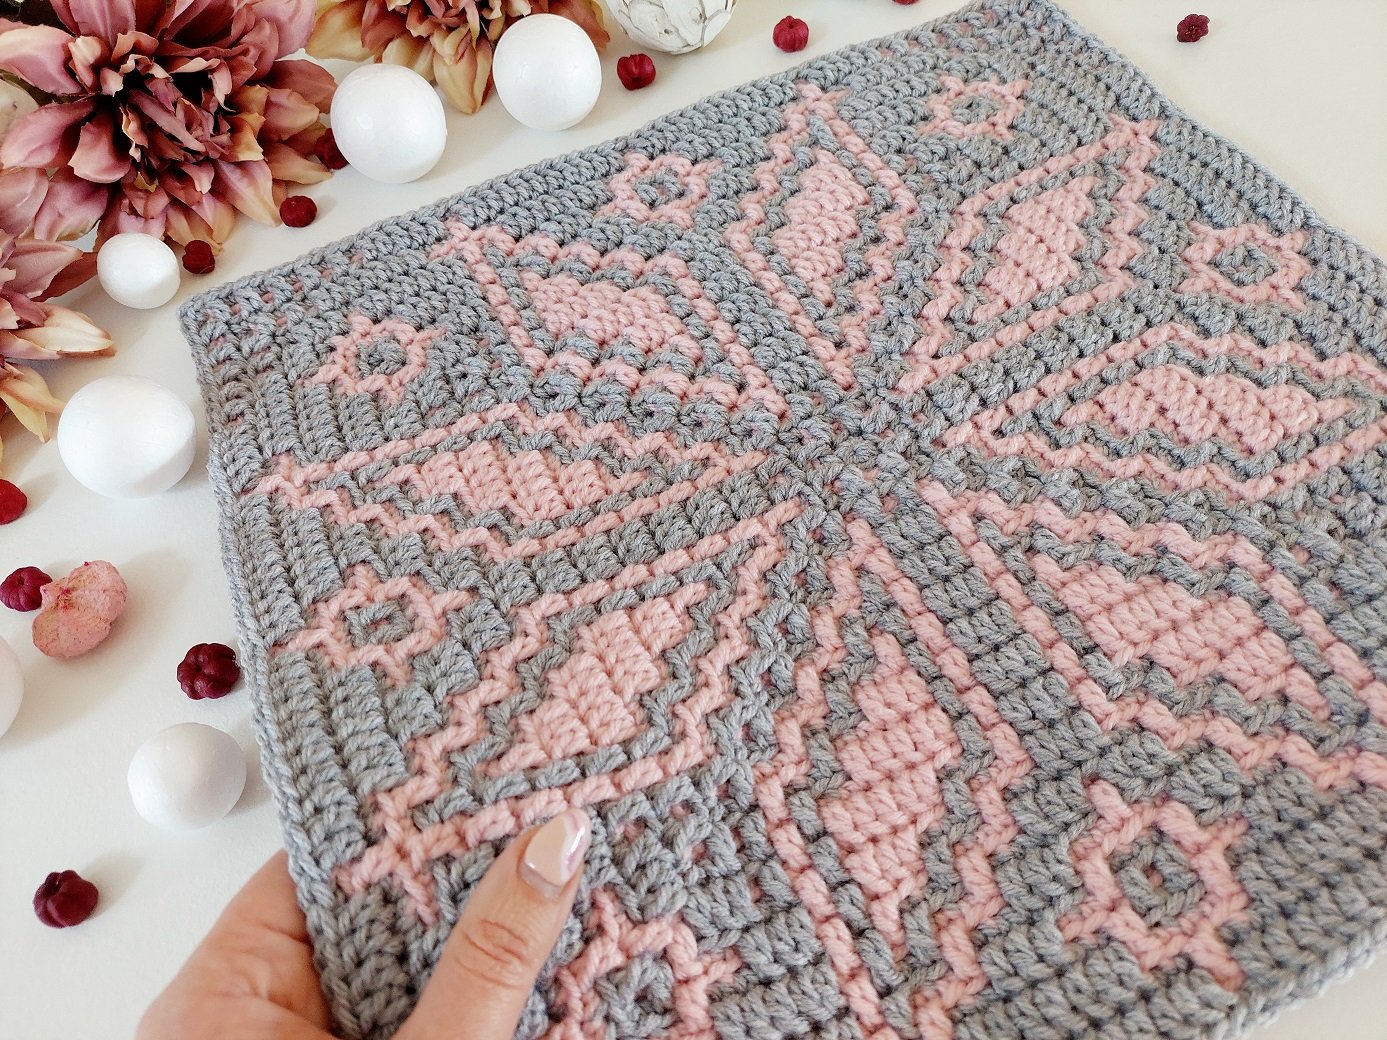 Colorful Mosaic Squares - Free Crochet Patterns